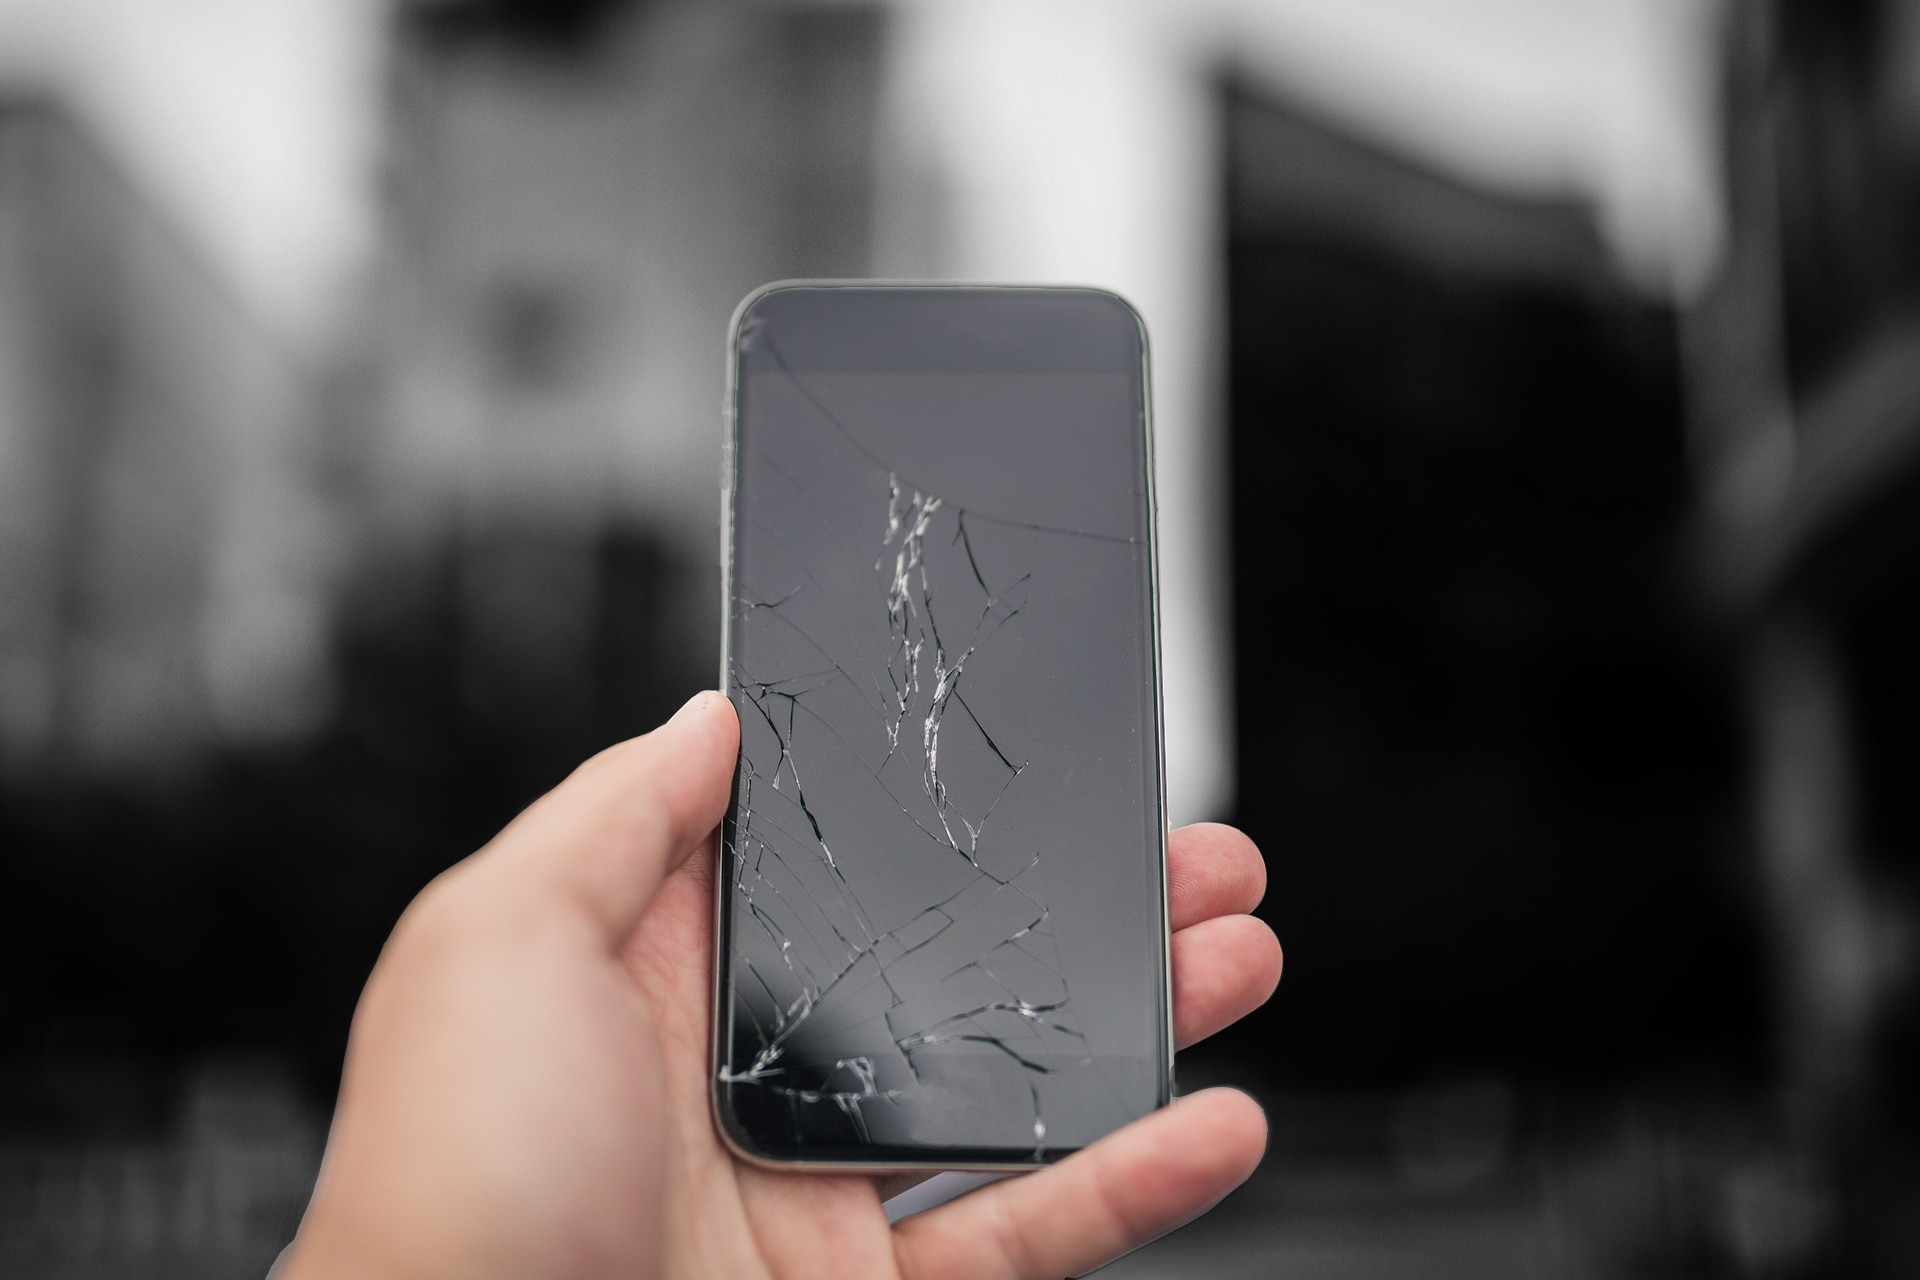 6 ways to remove Screen Scratches from your Mobile - FreeKaaMaal Blog